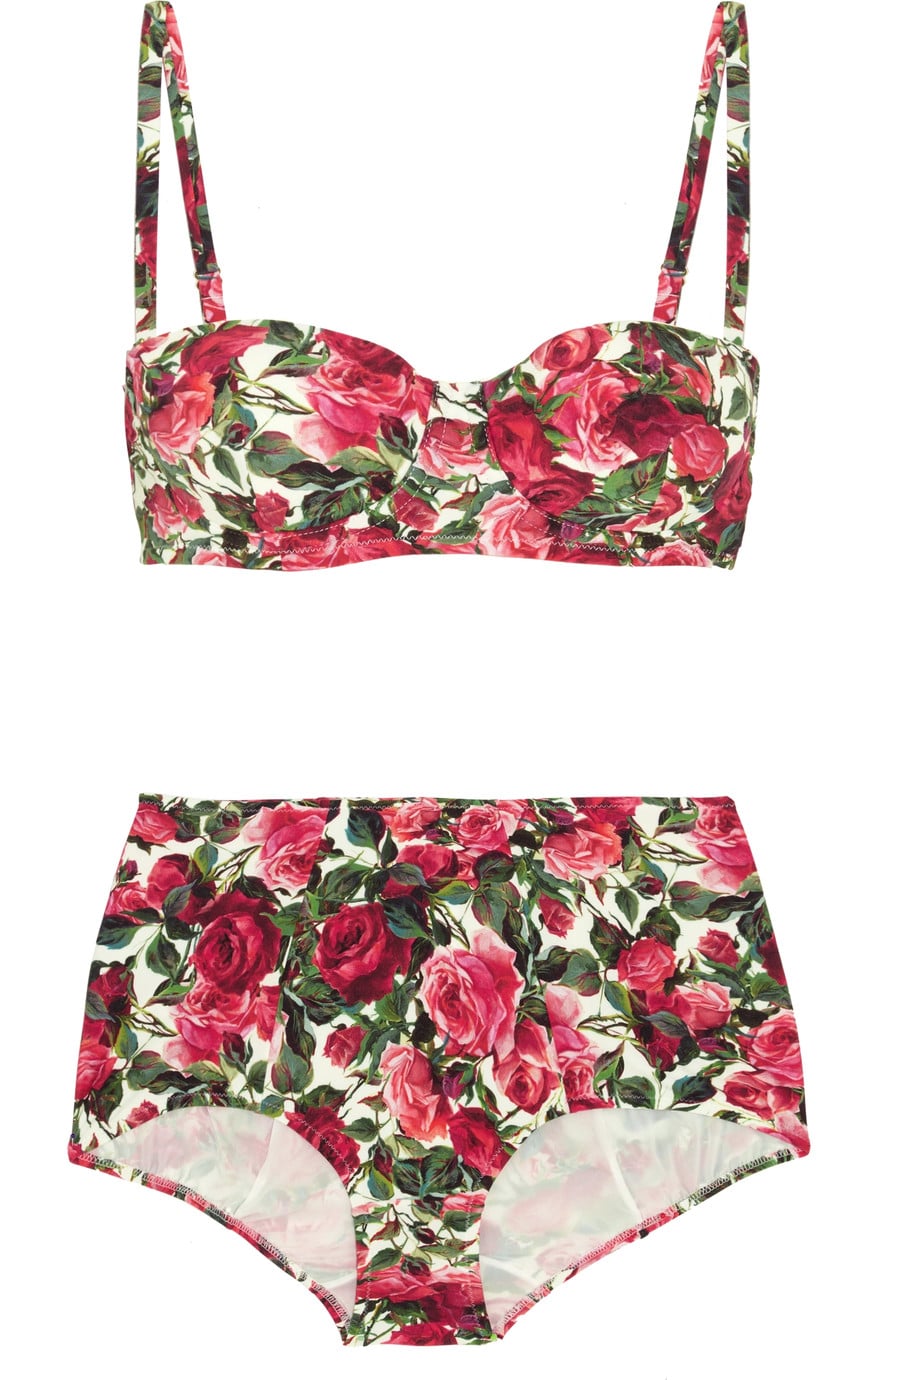 dolce and gabbana bathing suit